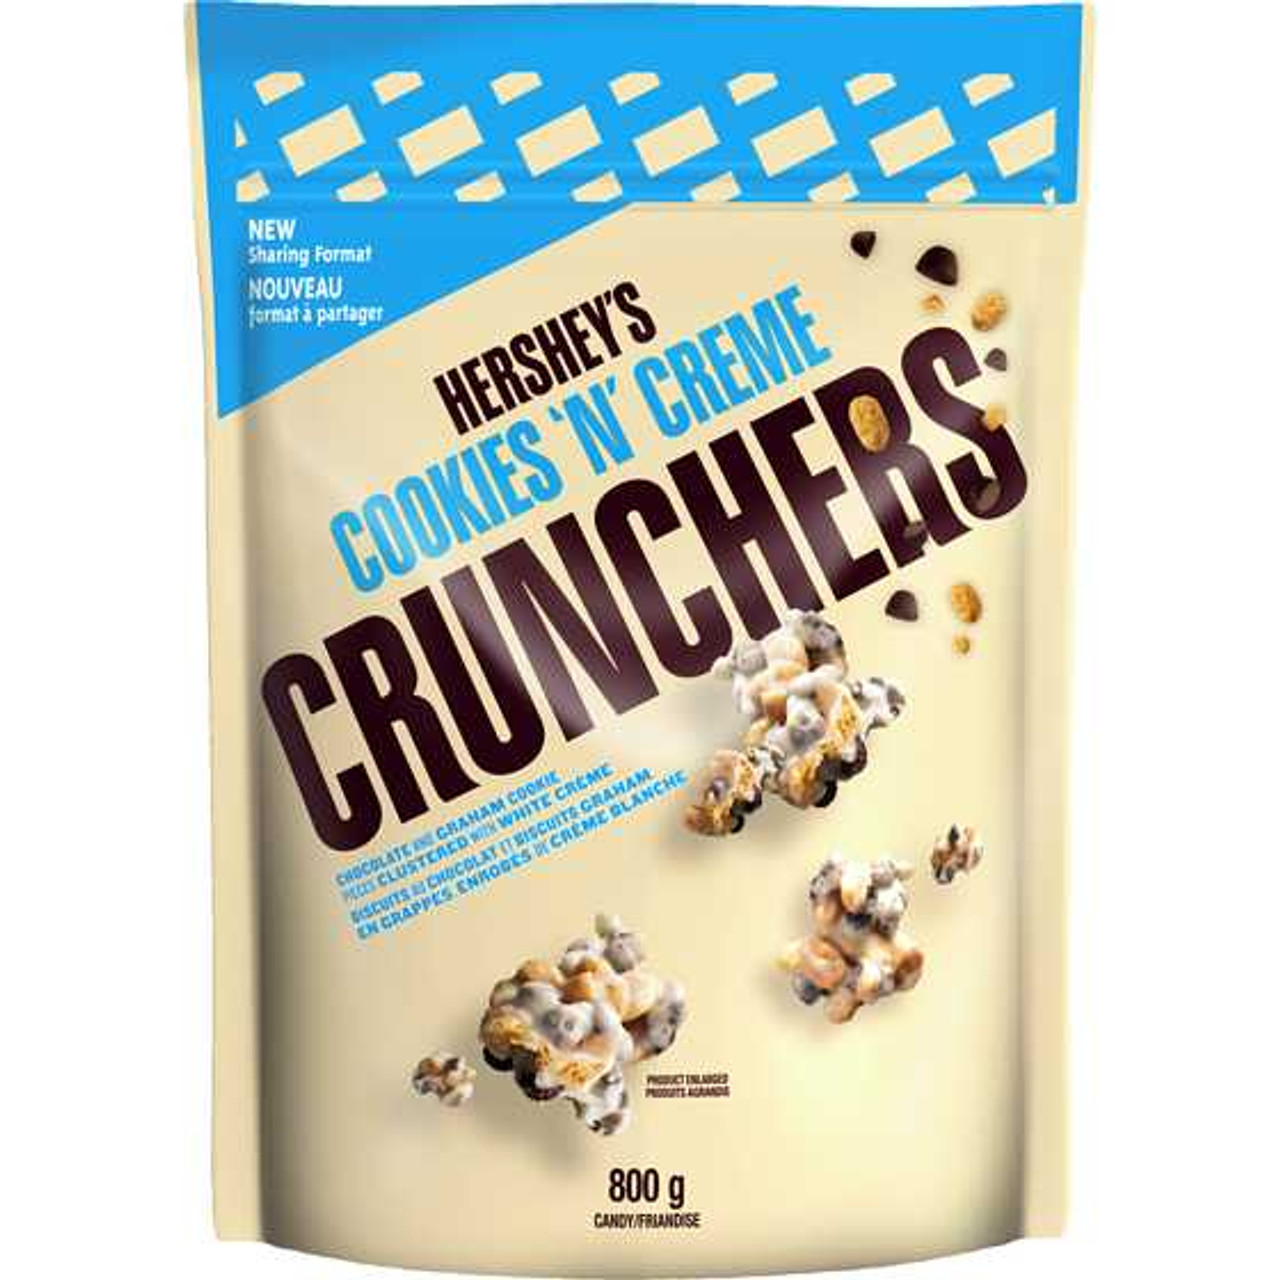 HERSHEY'S COOKIES 'N' CRÈME CRUNCHERS Candy 800 g HERSHEY'S Chicken Pieces